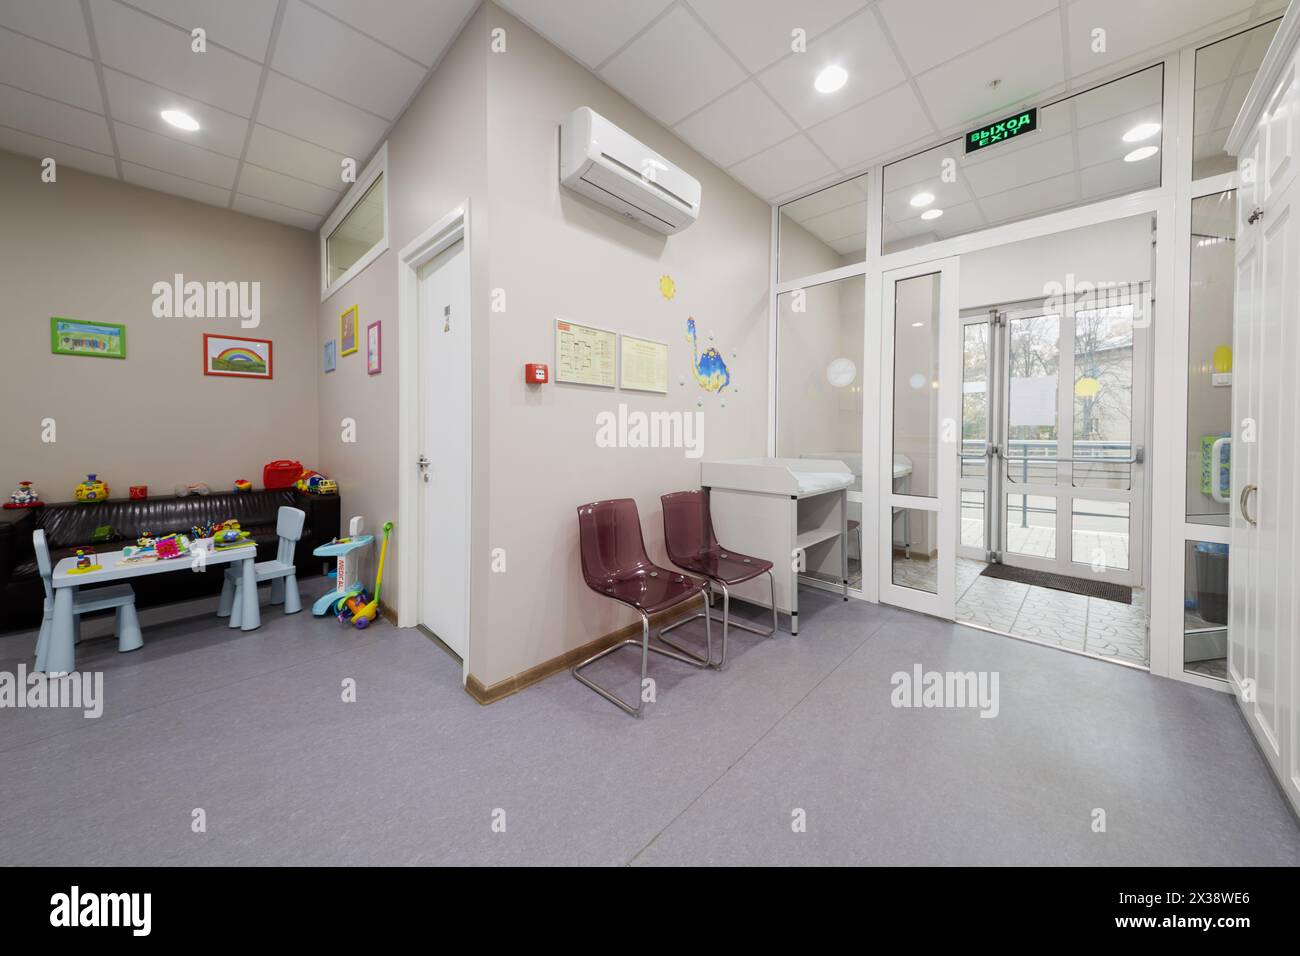 MOSCOW, RUSSIA - OCT 19, 2016: Entrance and reception hall in Children Medical Center Sanare for children of all ages from birth to 17 years old. Stock Photo